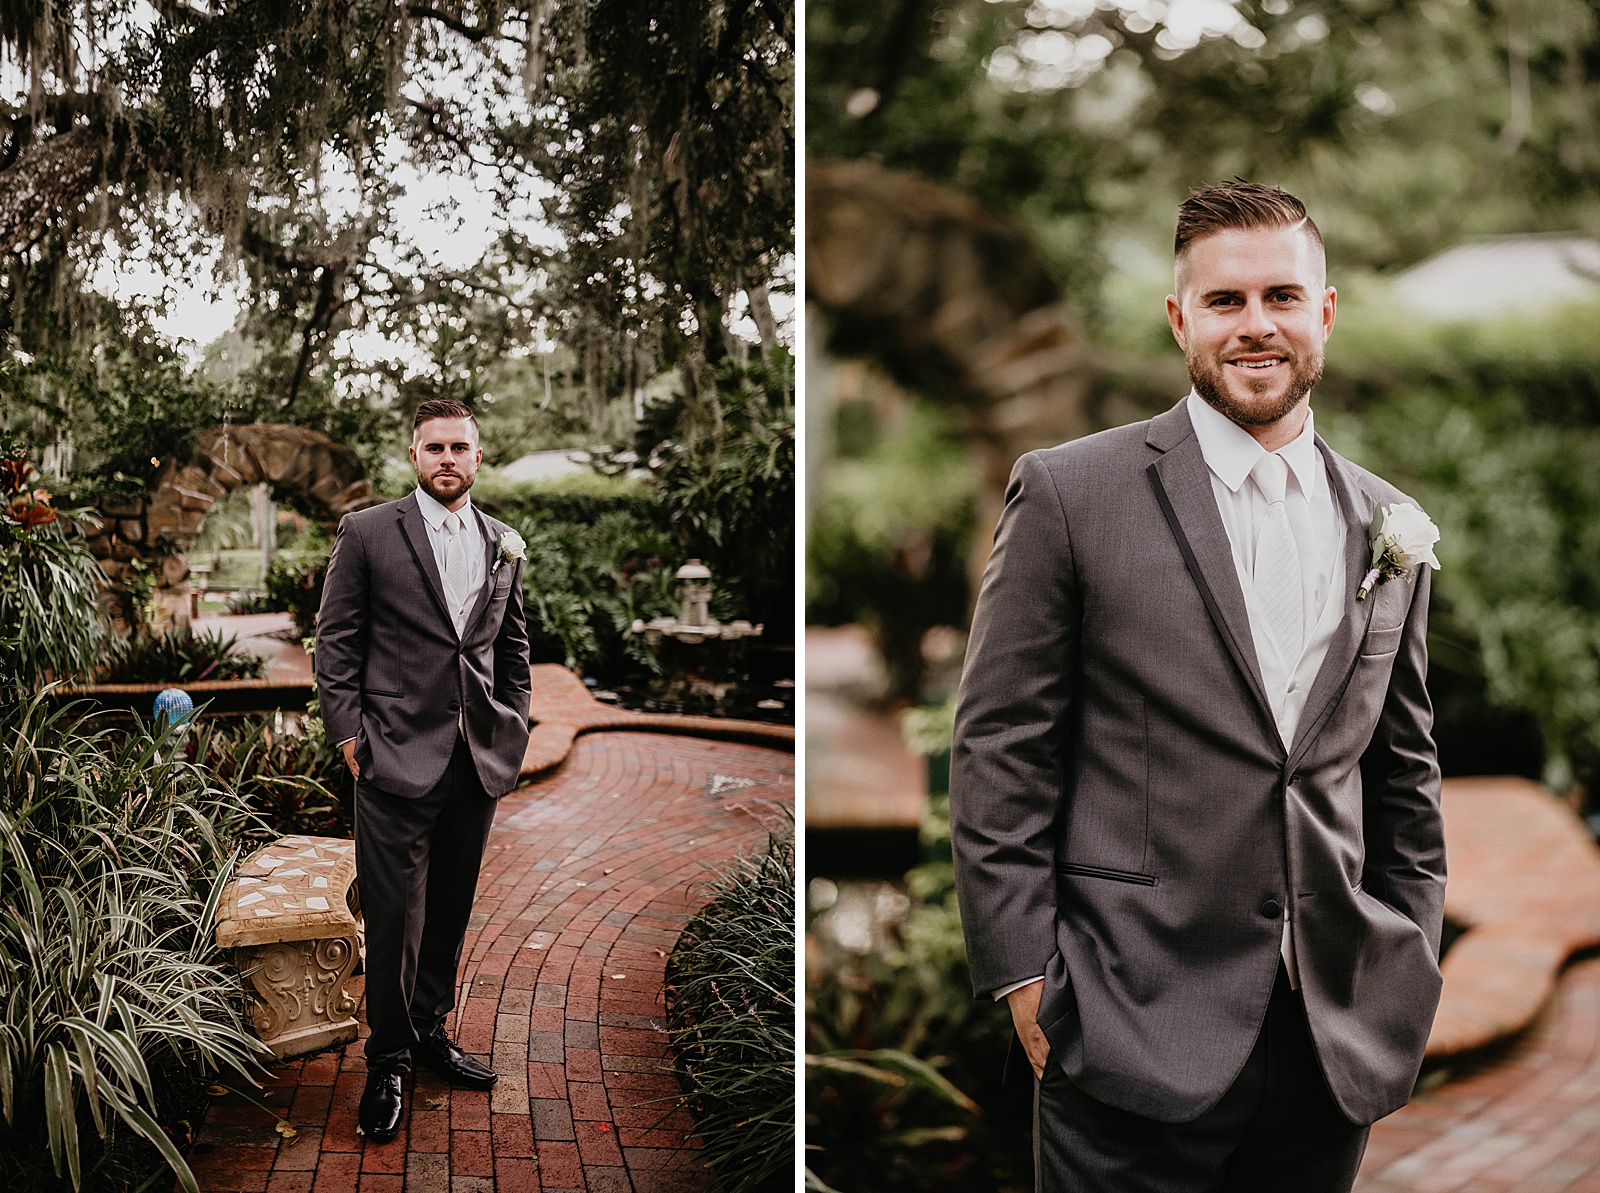 Estate on the Halifax Wedding captured by South Florida Wedding Photographer, Krystal Capone Photography